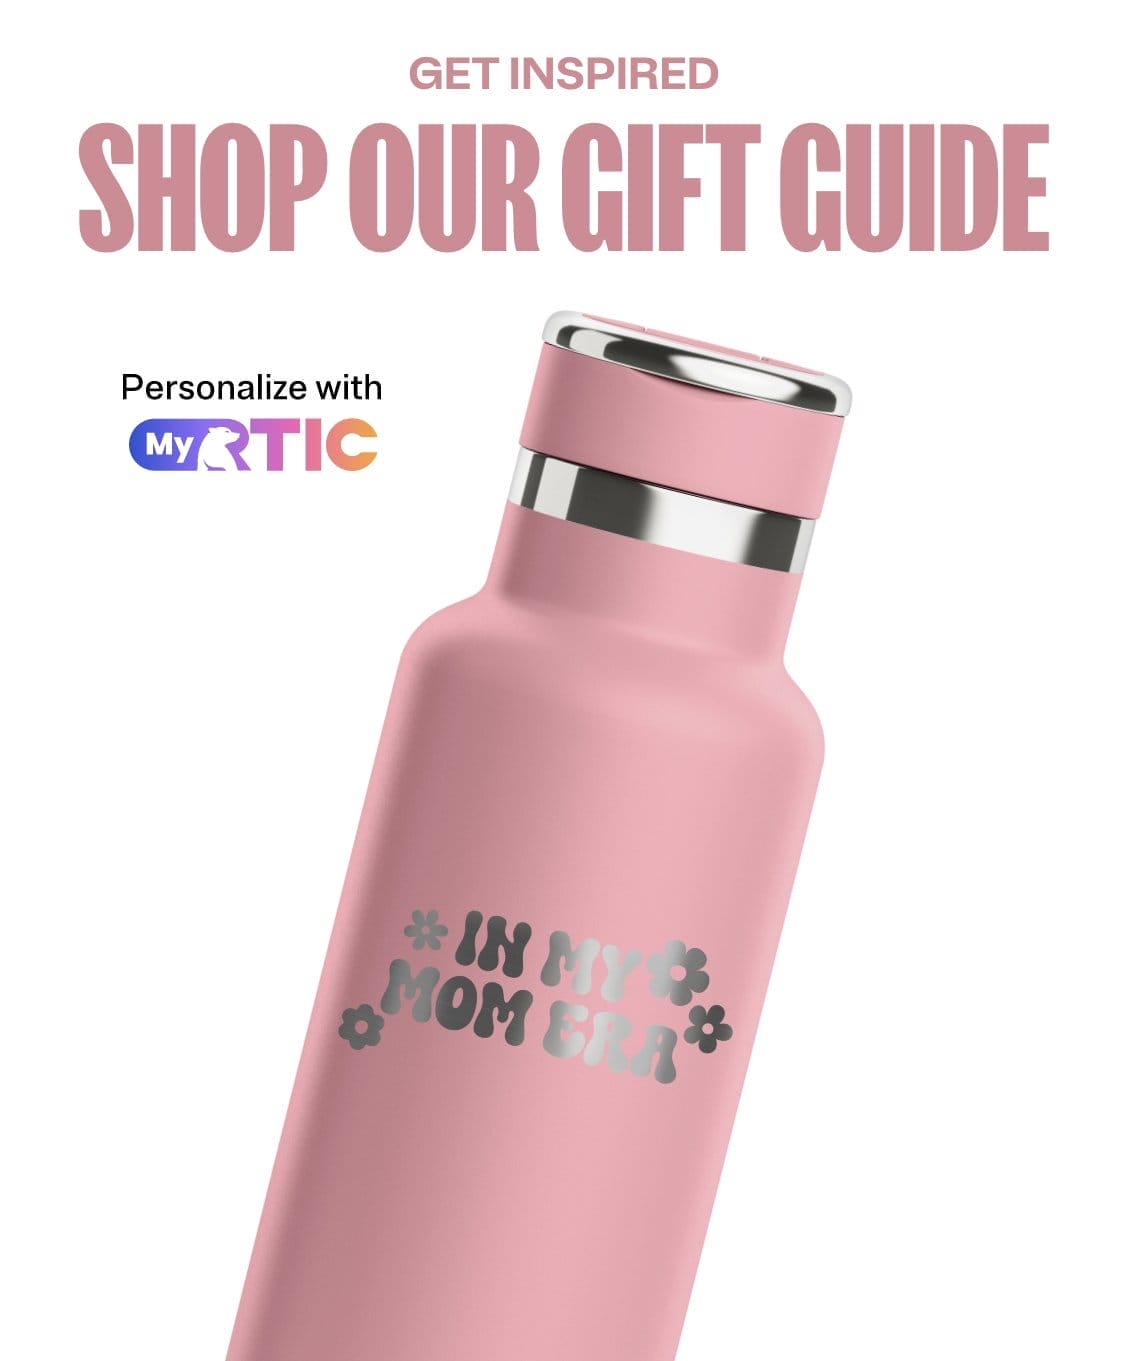 GET INSIPRED | SHOP OUR GIFT GUIDE